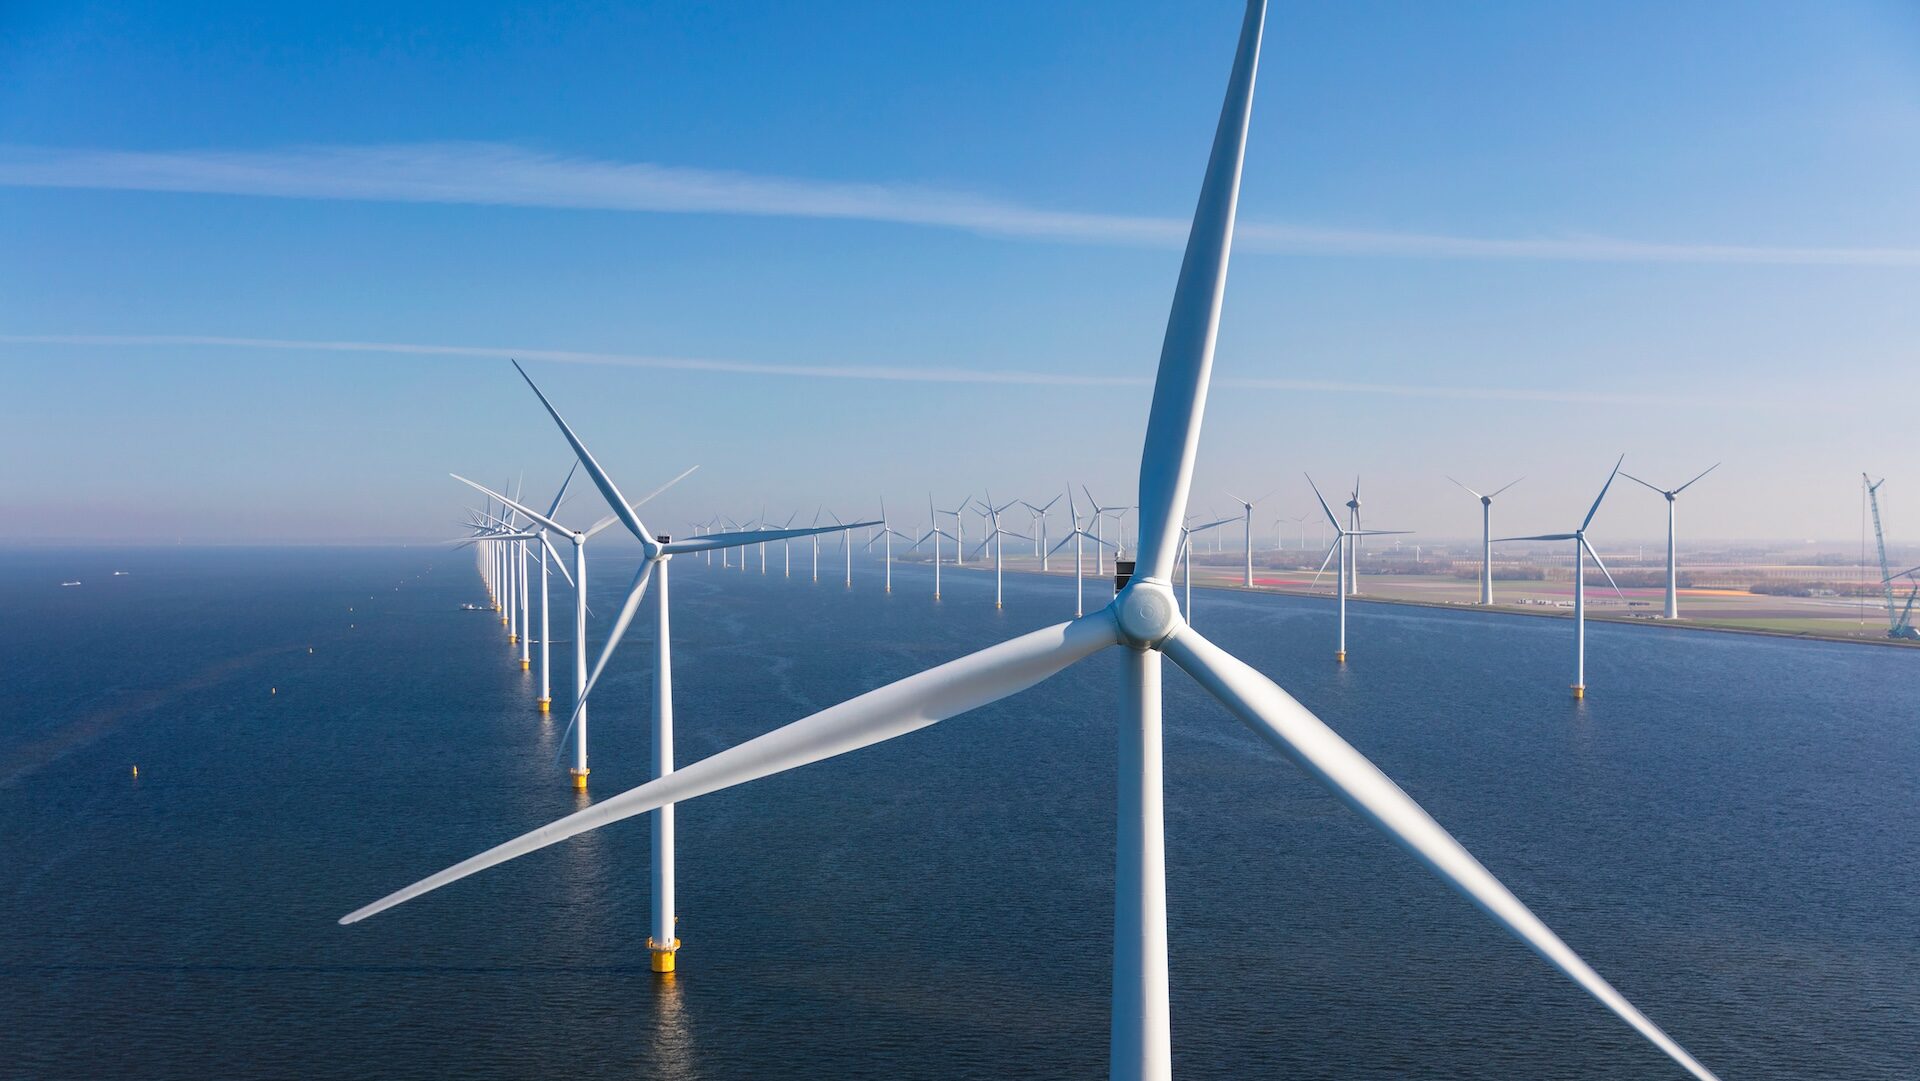 Notre Dame Law School’s Journal on Emerging Technologies Published “Great Lakes Offshore Wind: Creating a Legal Framework for Net Positive Environmental, Social, and Financial Benefits”